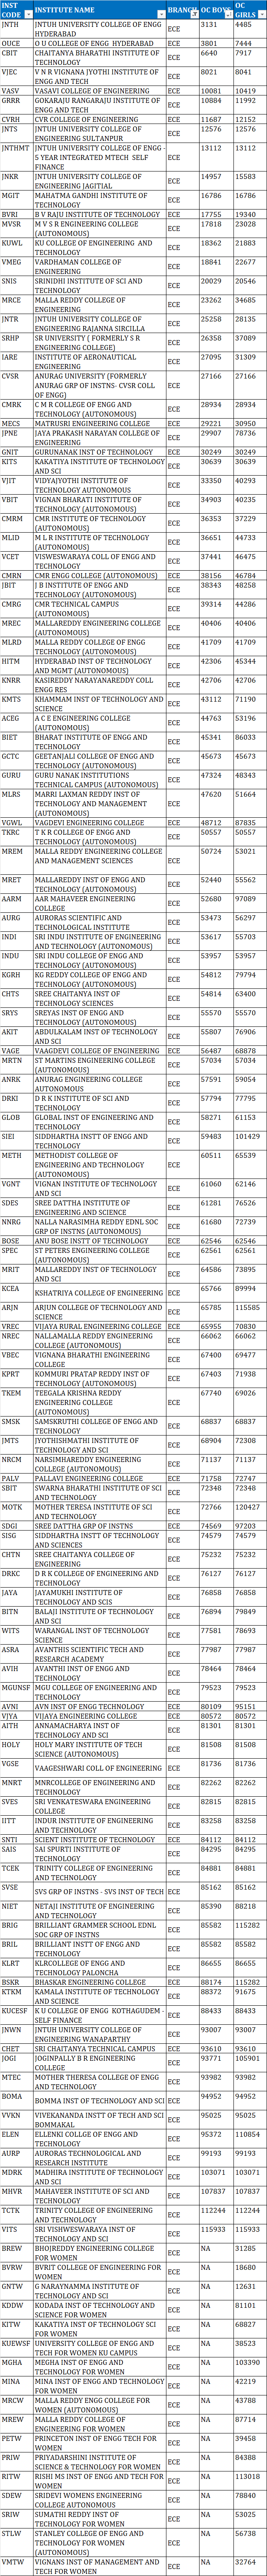 TSEAMCET 2023 second phase cutoff ranks for ECE        ELECTRONICS AND COMMUNICATION ENGINEERING